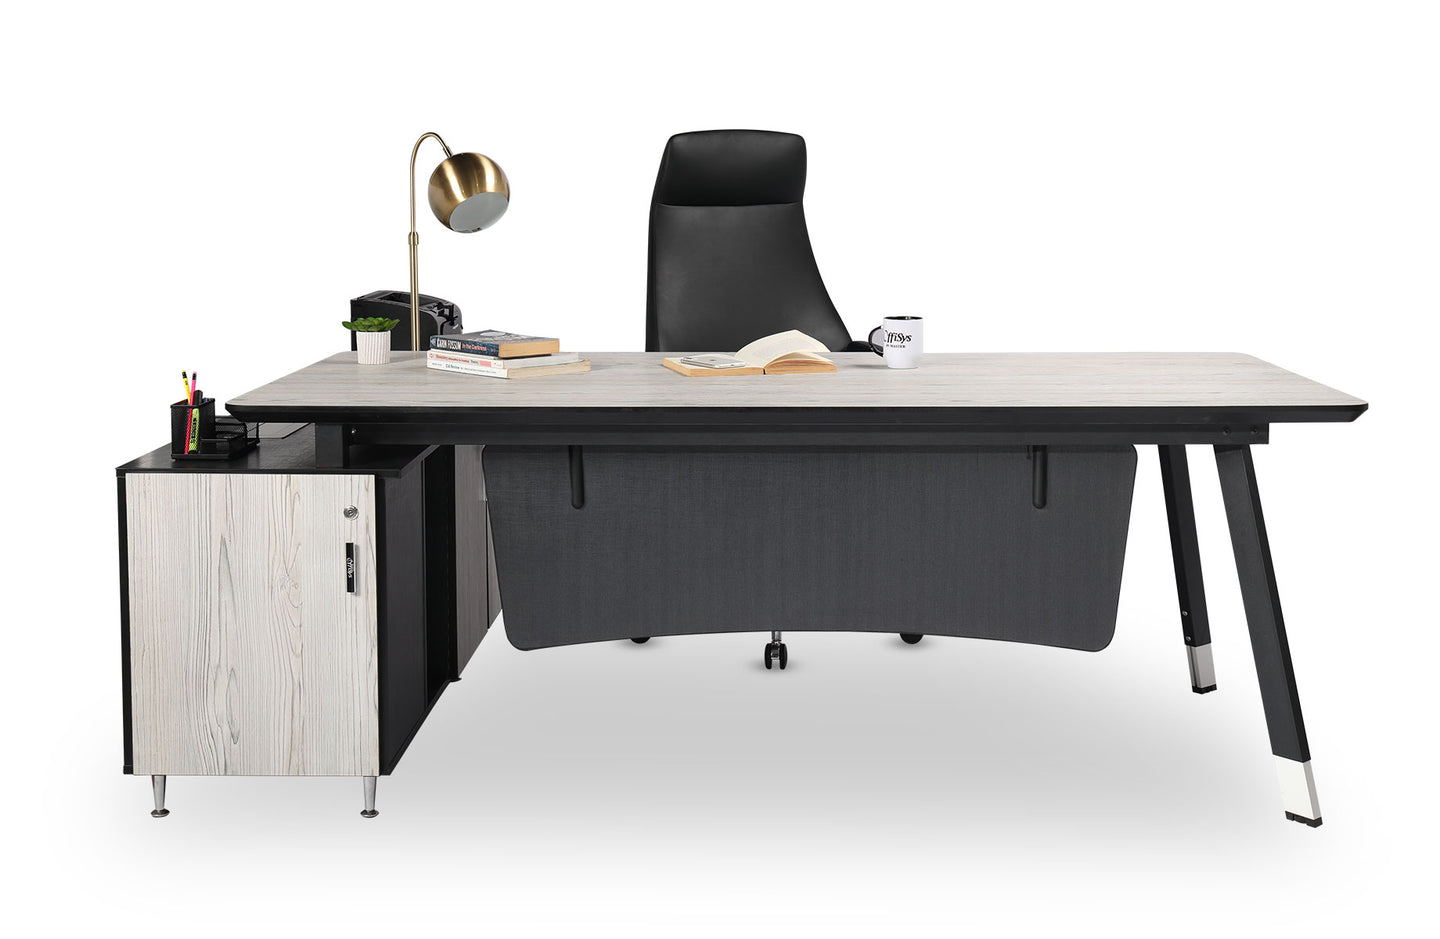 MO MANAGER TABLE WITH SIDE RACK (MO-CLOUD-TJ-15B-24A)